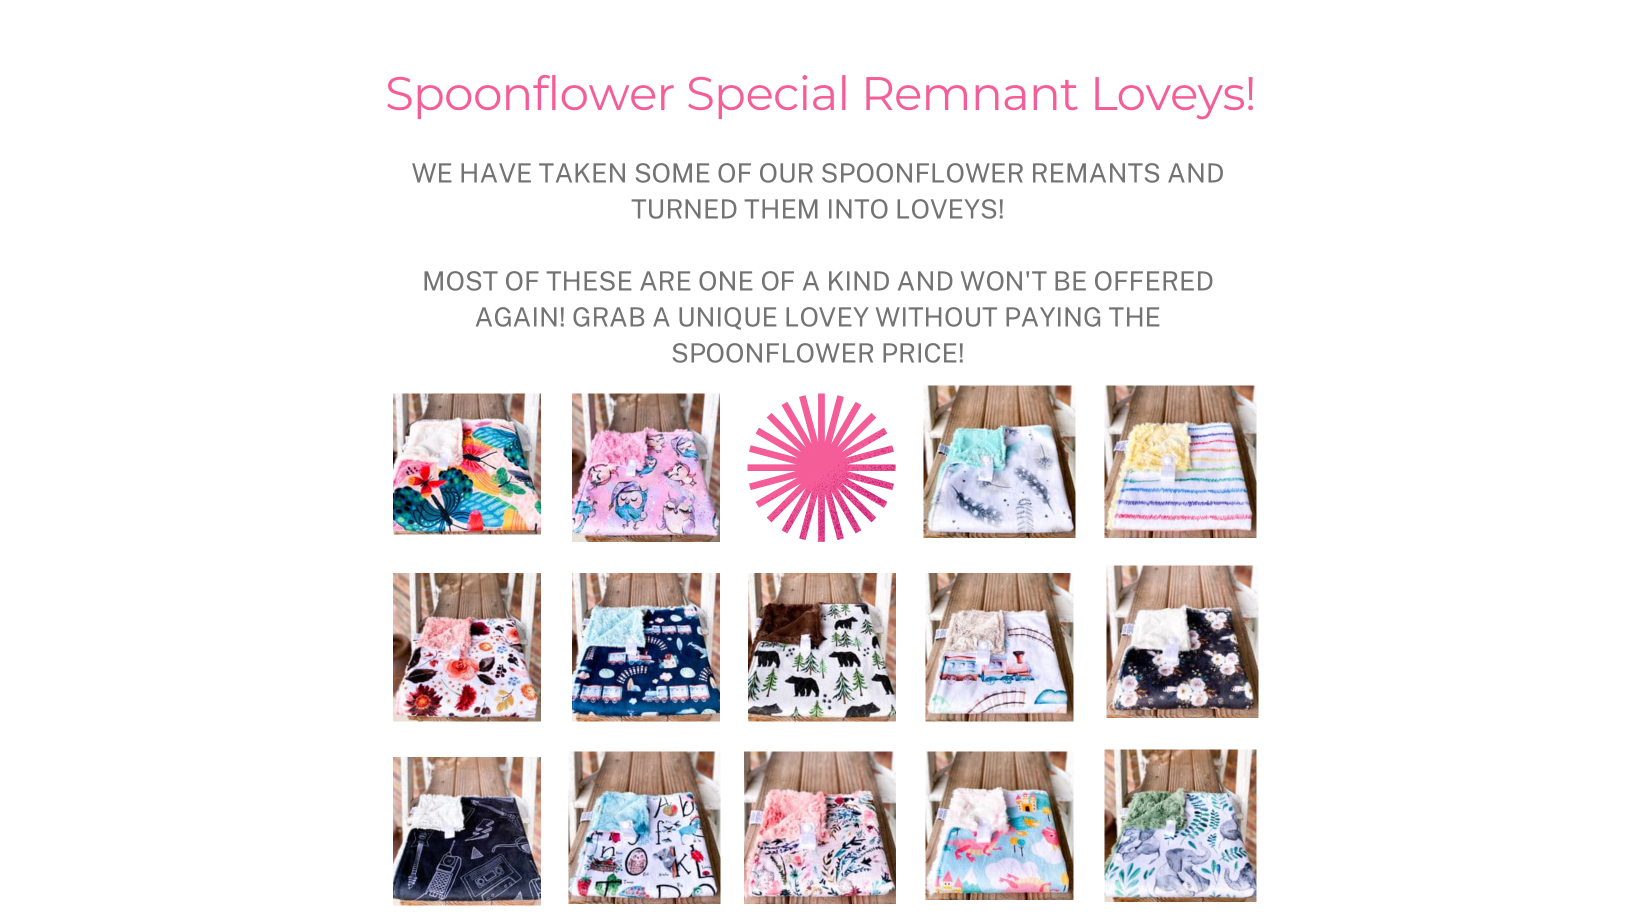 Spoonflower Special Remnant Lovey Sale